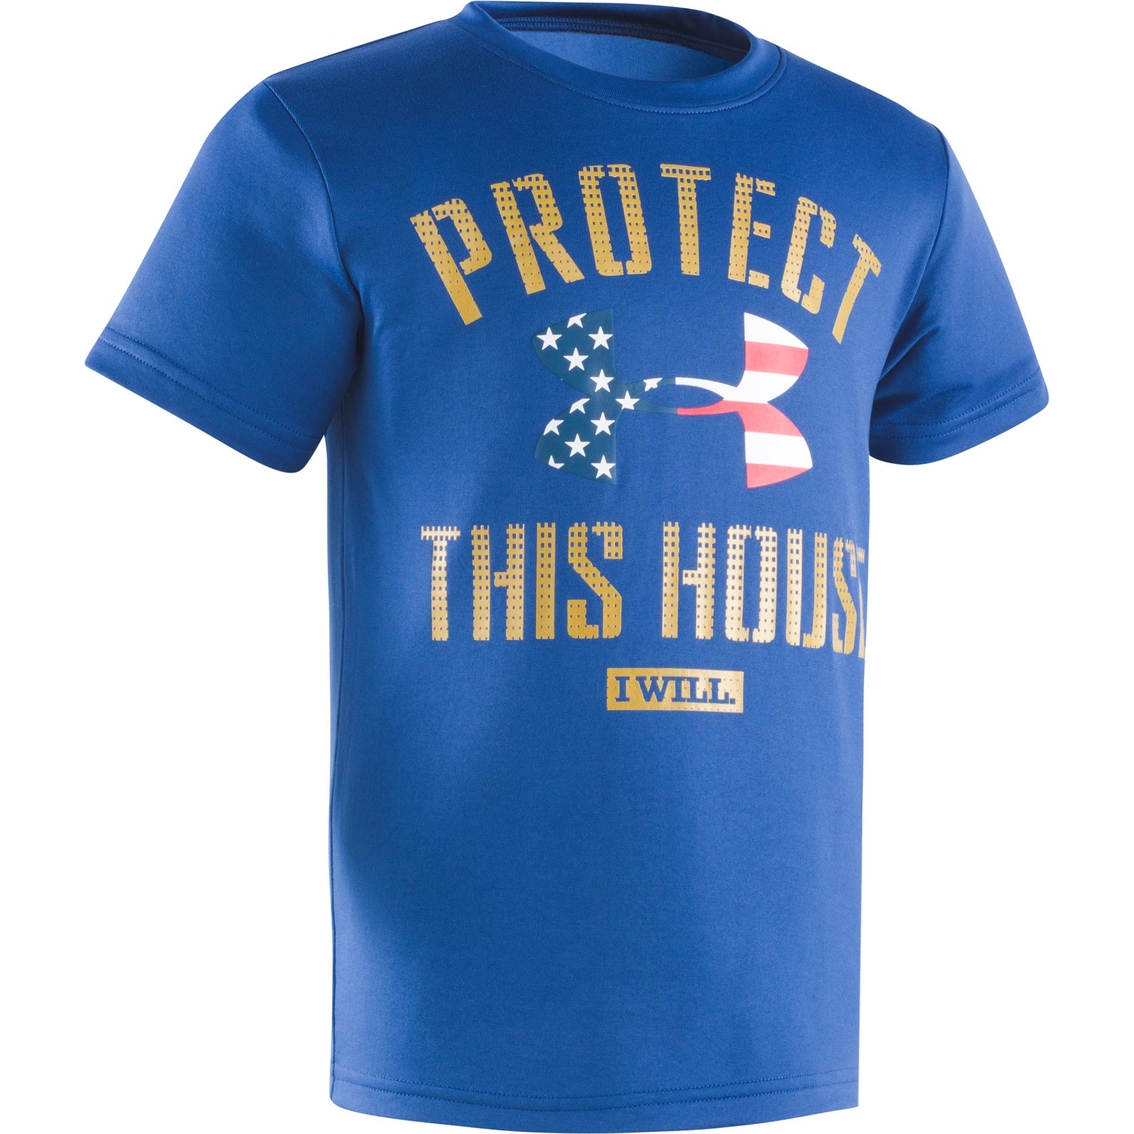 under armour protect this house